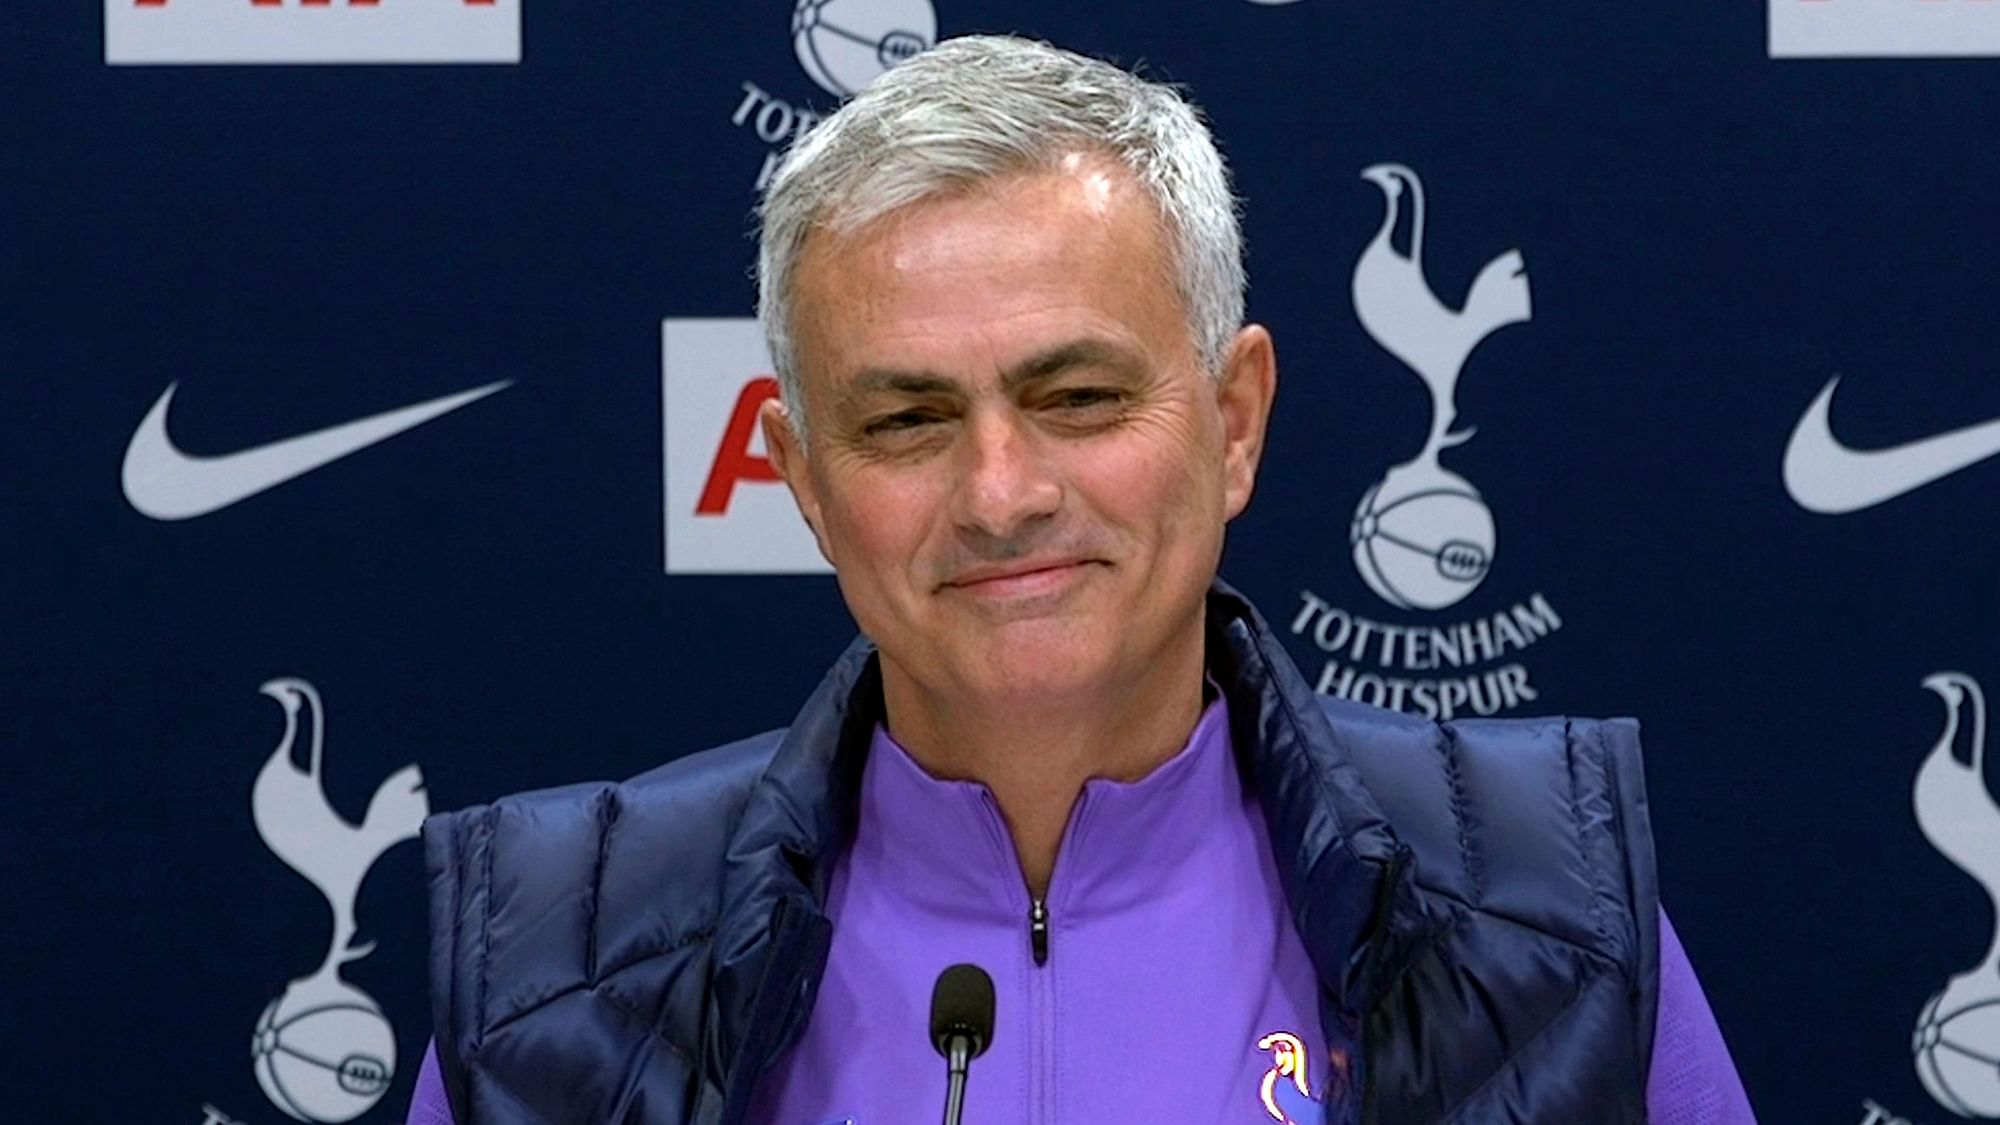 Tottenham Hotspur manager Jose Mourinho has said that his yellow card during their English Premier League game against Southampton was fair as he was rude to an “idiot”.